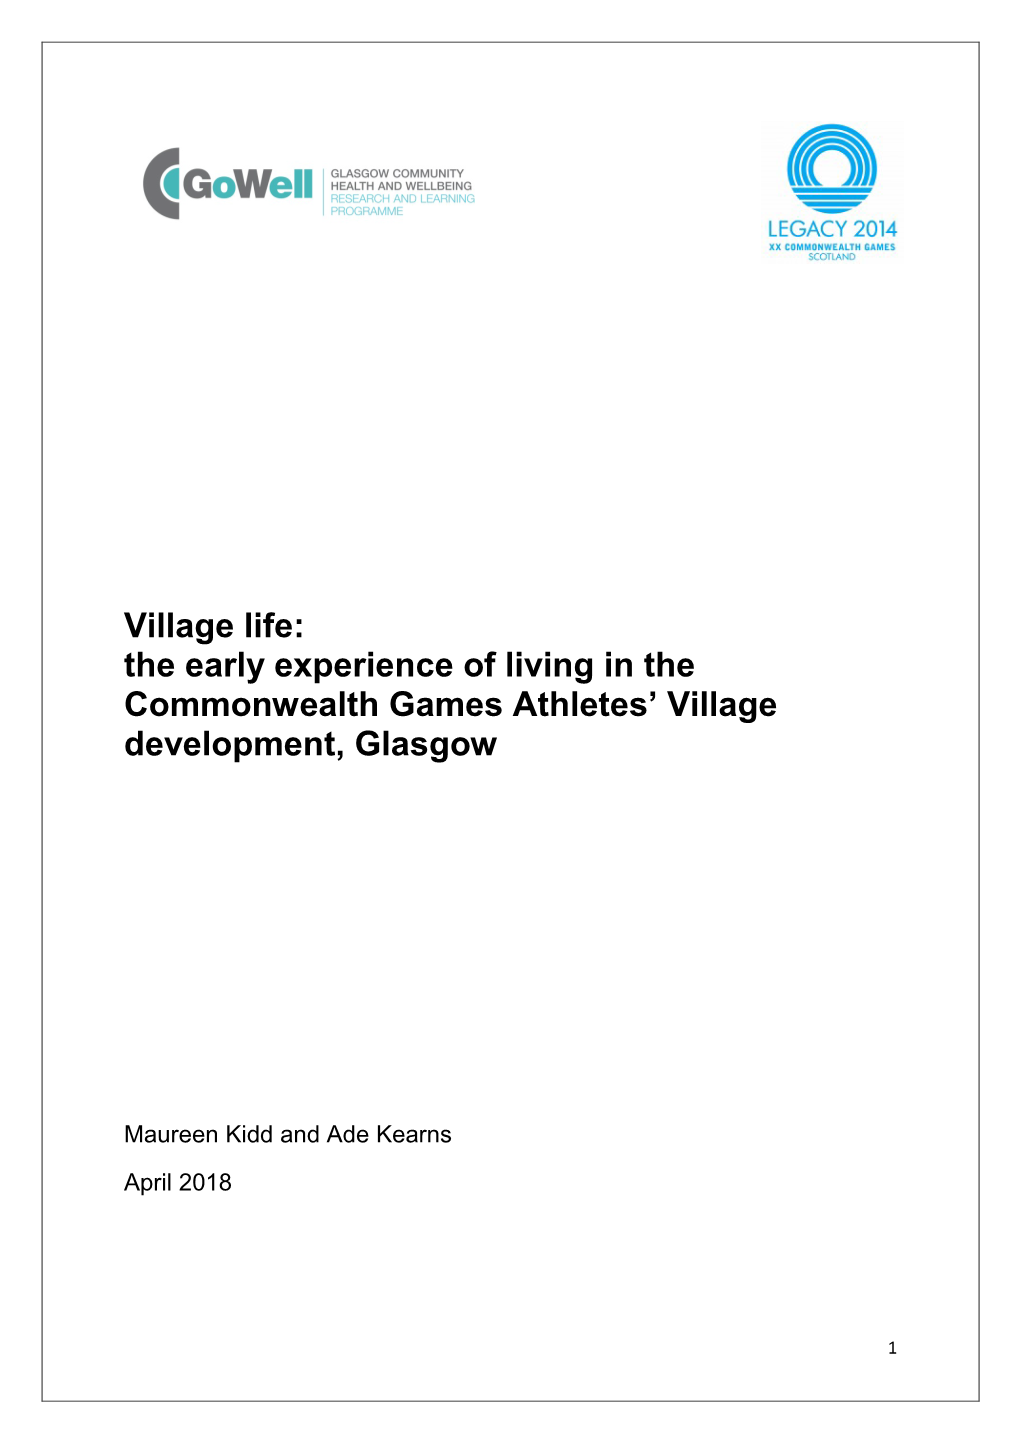 The Early Experience of Living in the Commonwealth Games Athletes’ Village Development, Glasgow